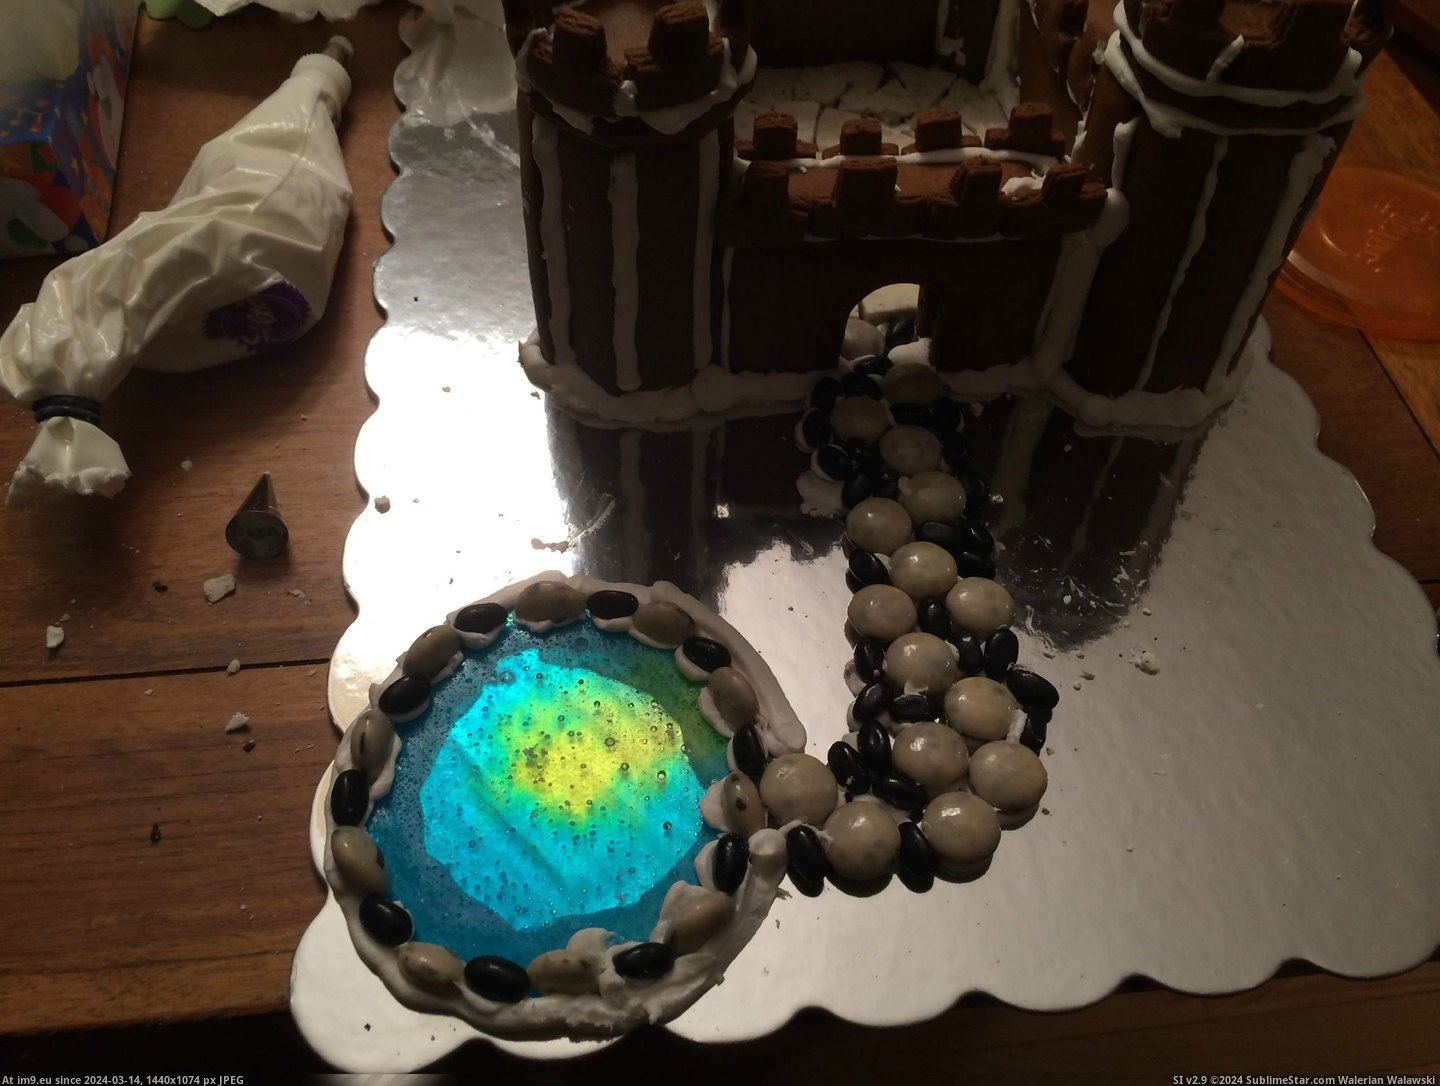 #Husband #Get #Our #Divorced #Collaborated #Project #Gingerbread #Success [Pics] My husband and I collaborated on our first gingerbread project and didn't get divorced...success! 18 Pic. (Image of album My r/PICS favs))